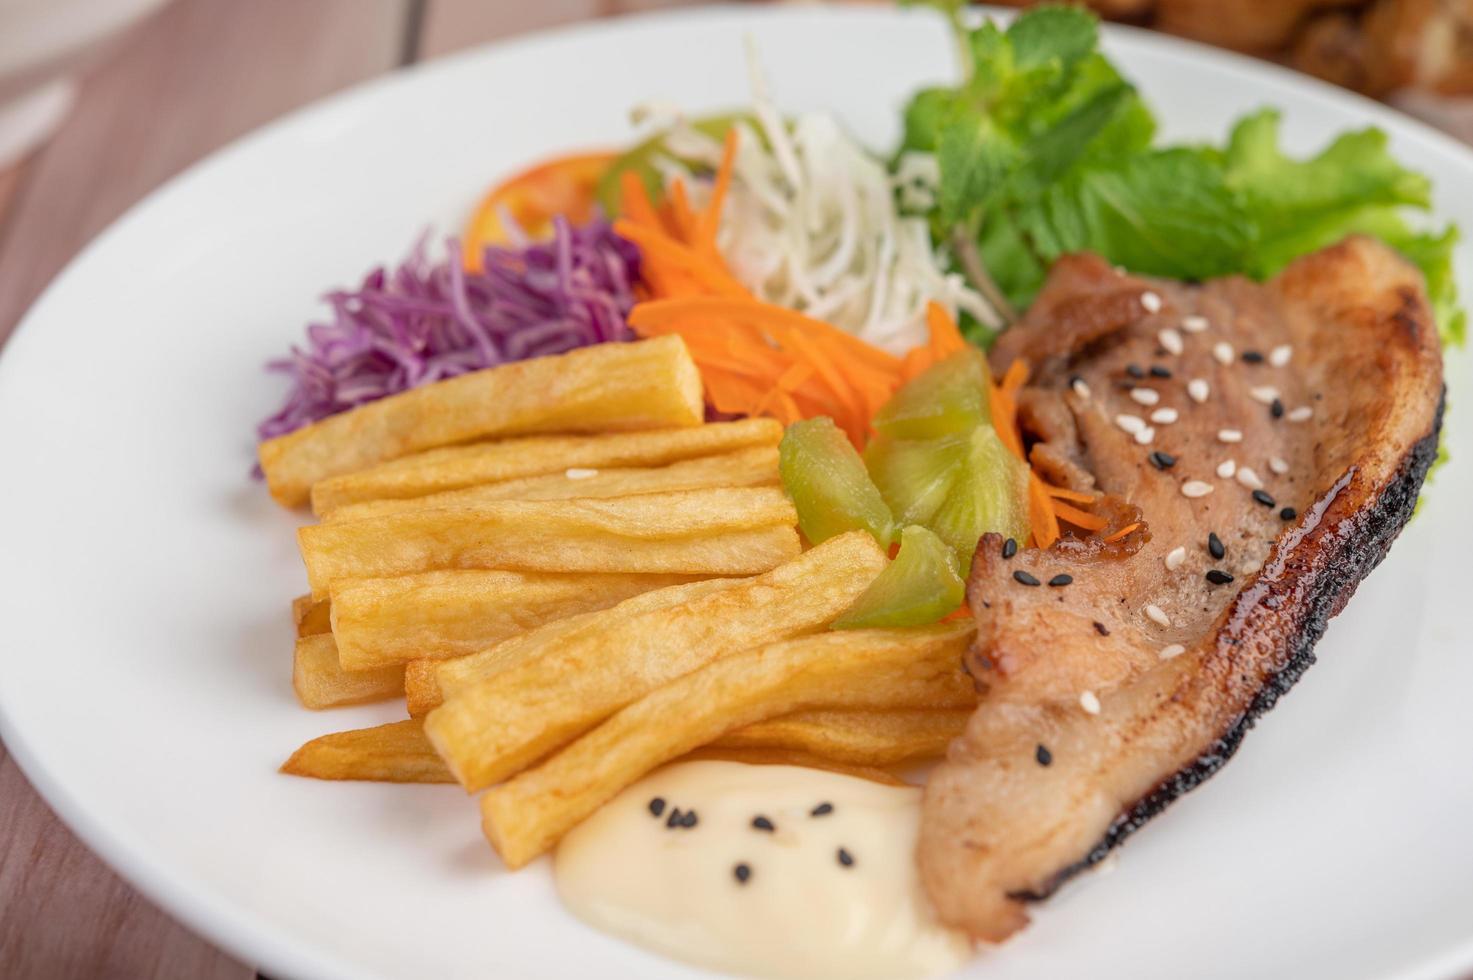 Fish steak with french fries and salad photo